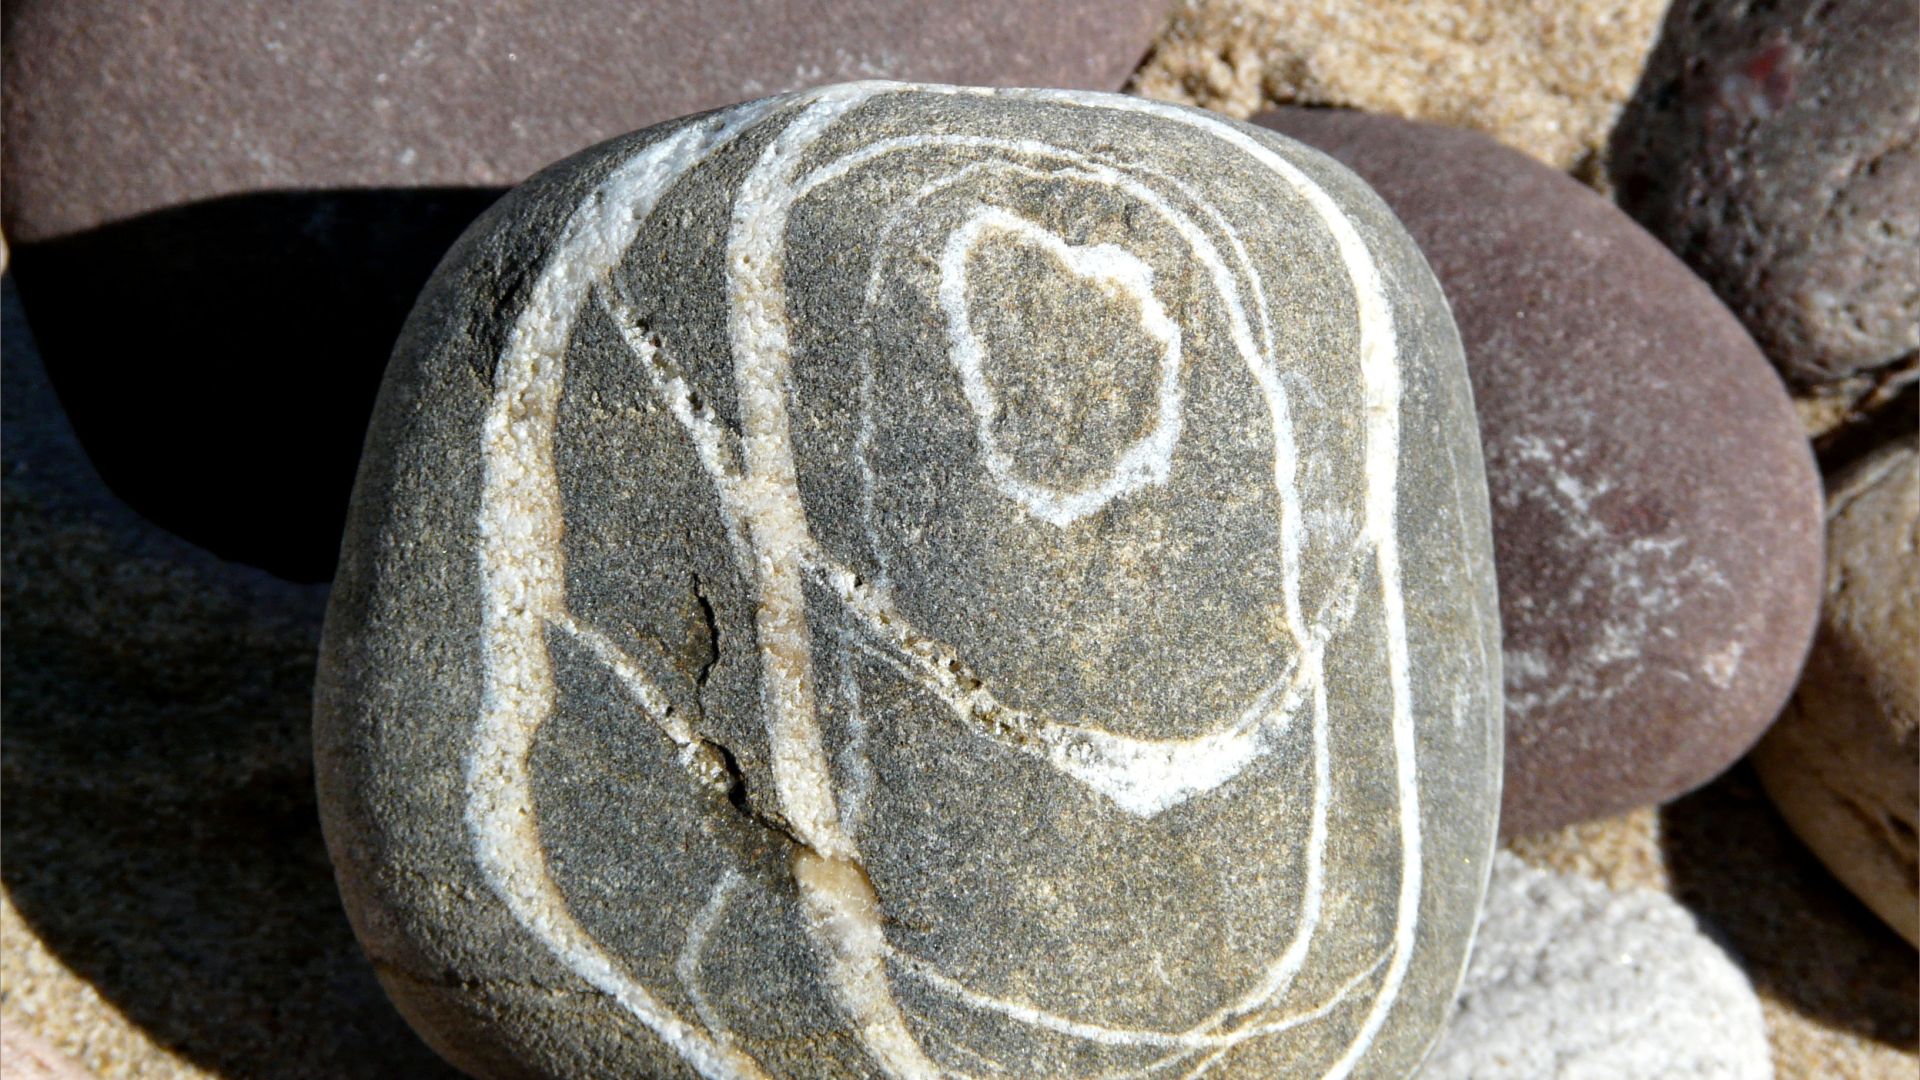 Wave-worn beach stone of grey sedimentary rock with natural abstract pattern of white veins with other pebbles on the beach